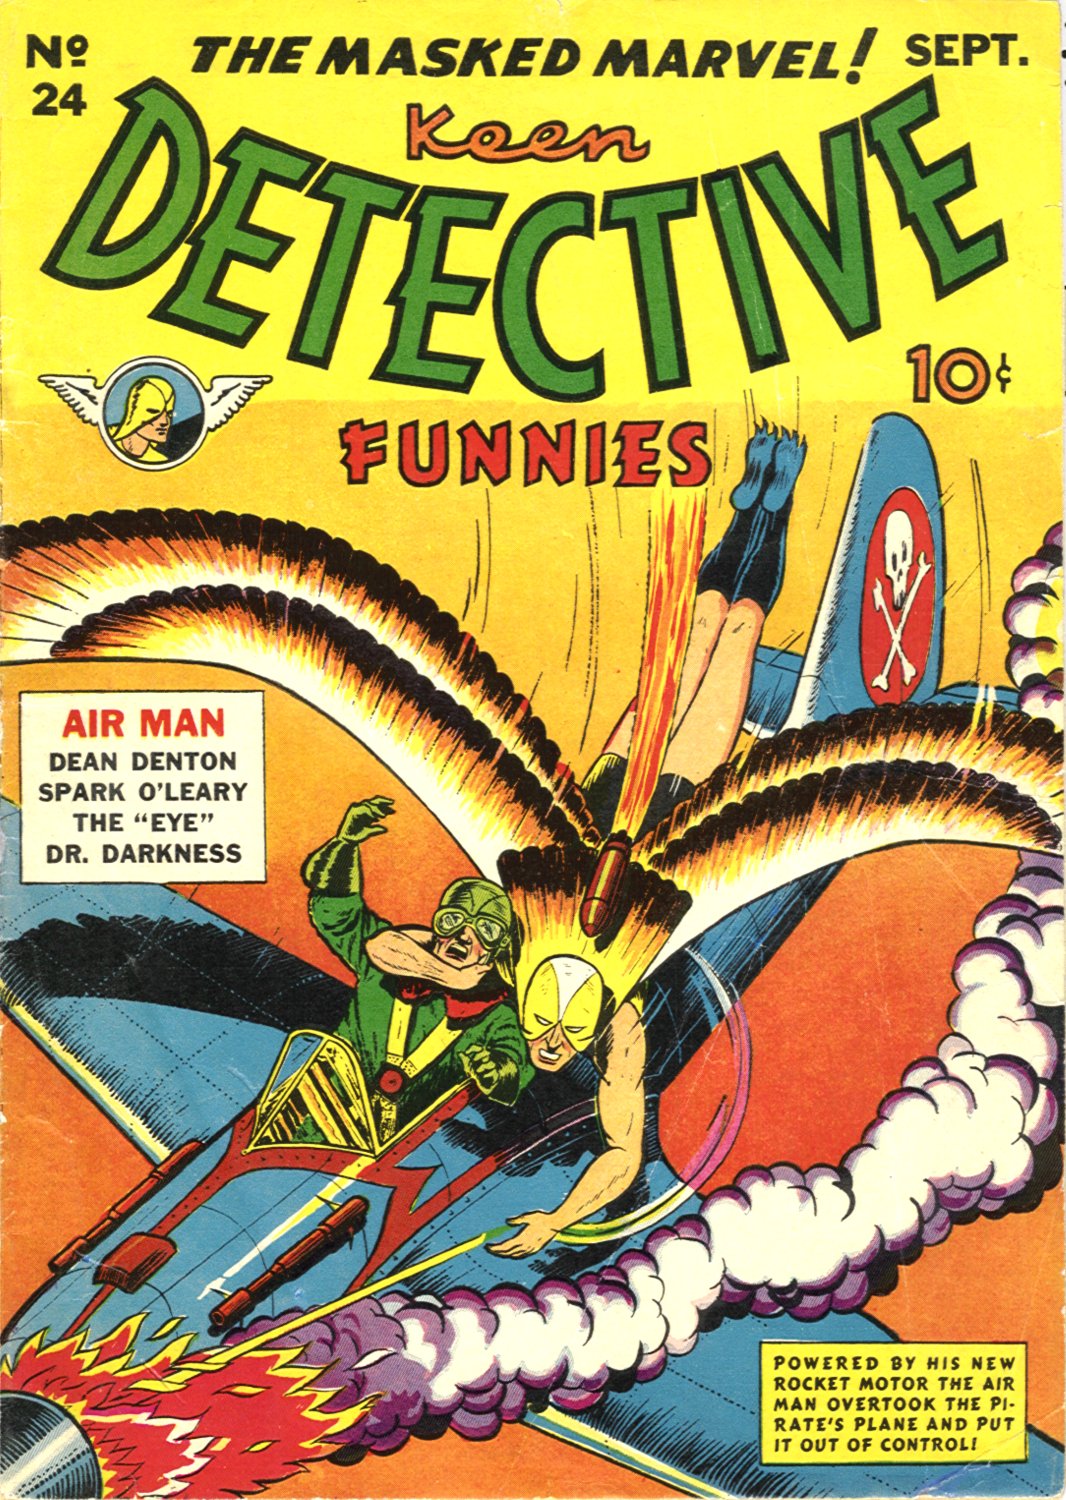 Read online Keen Detective Funnies comic -  Issue #24 - 1